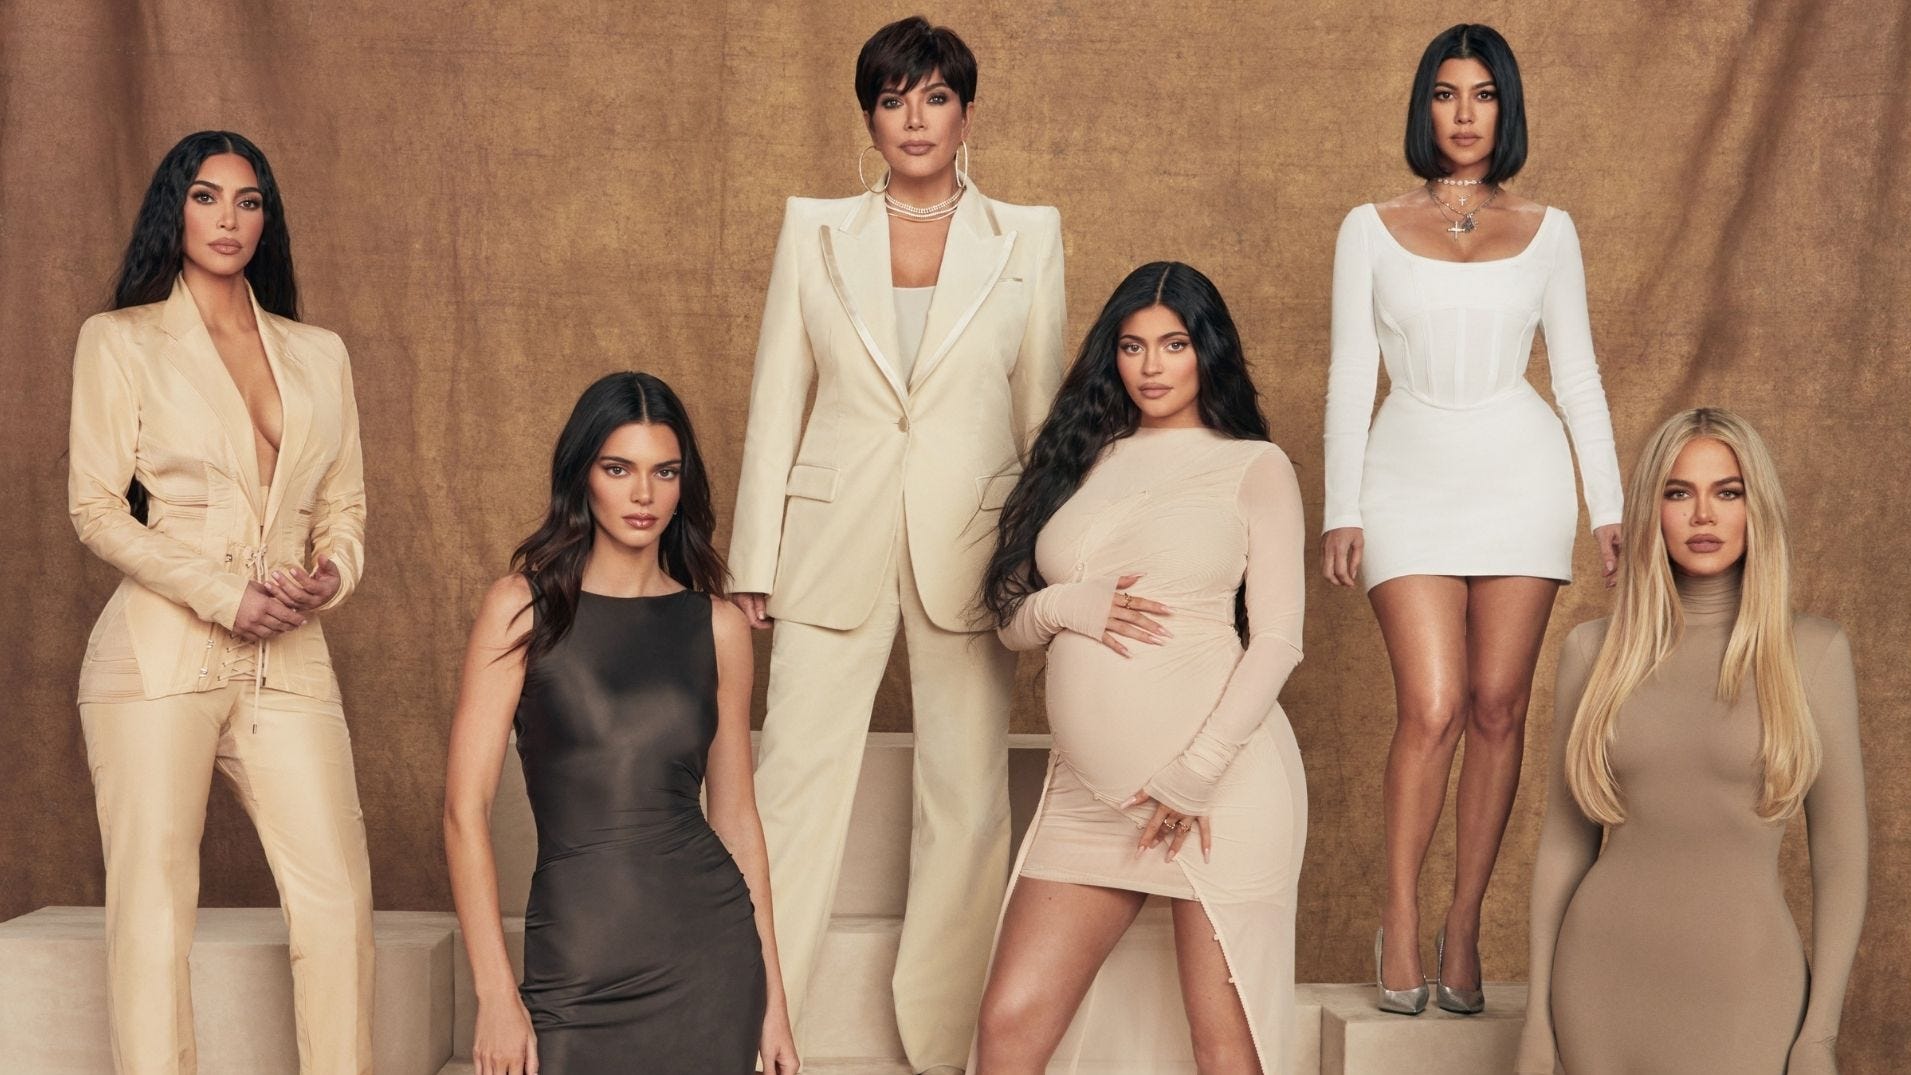 When is season 3 of 'The Kardashians' coming out? Watch trailer here.